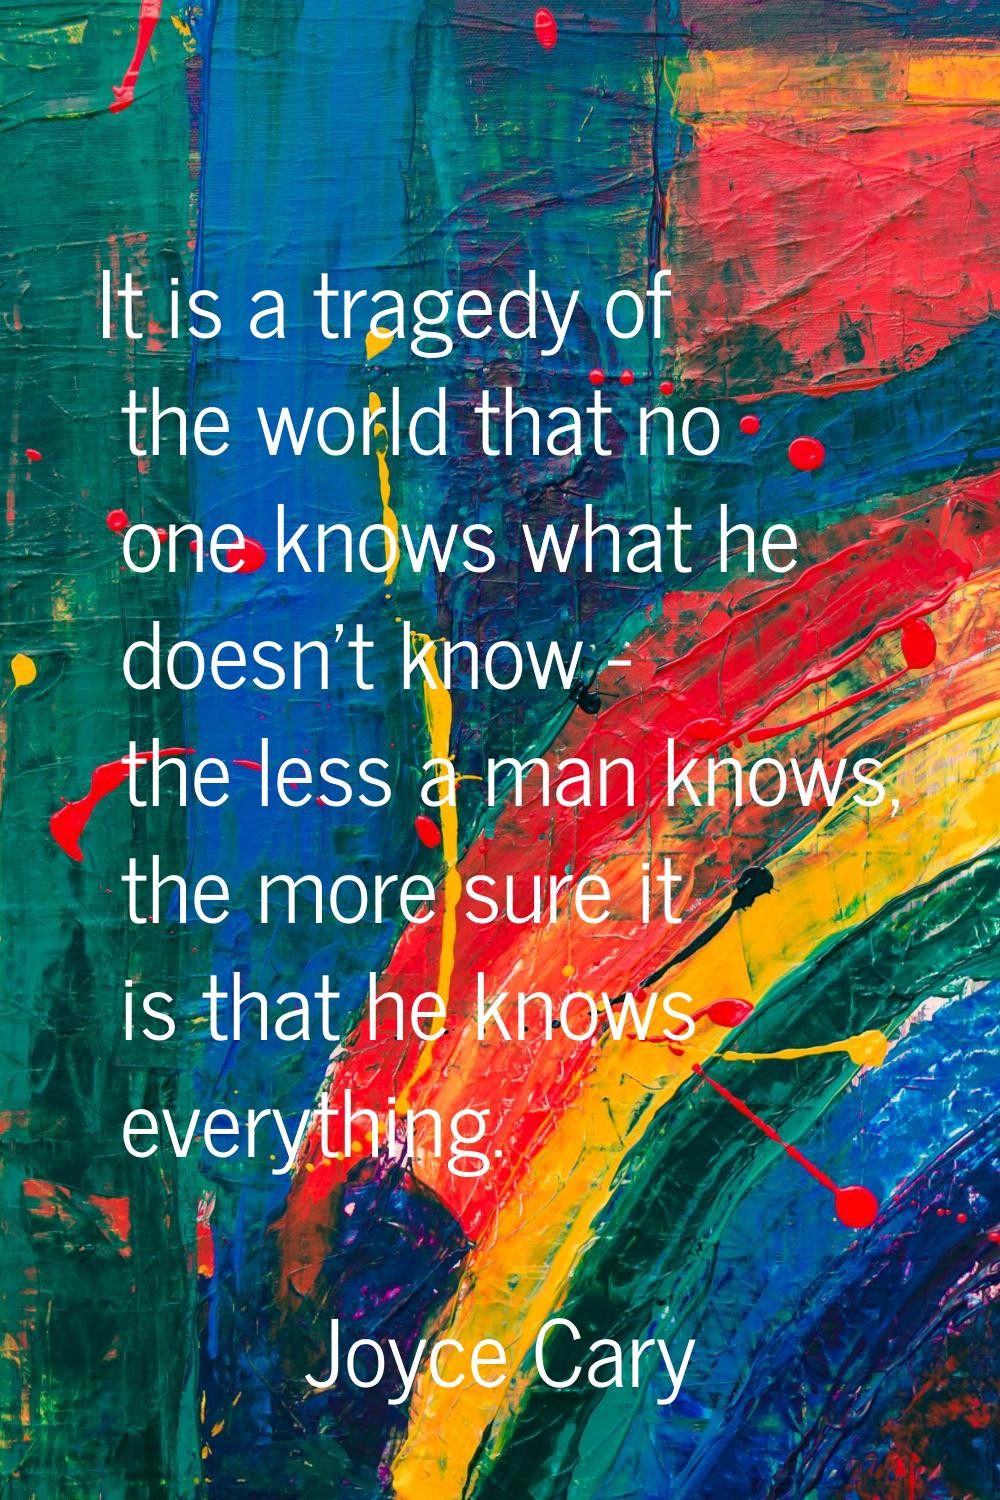 It is a tragedy of the world that no one knows what he doesn't know - the less a man knows, the mor